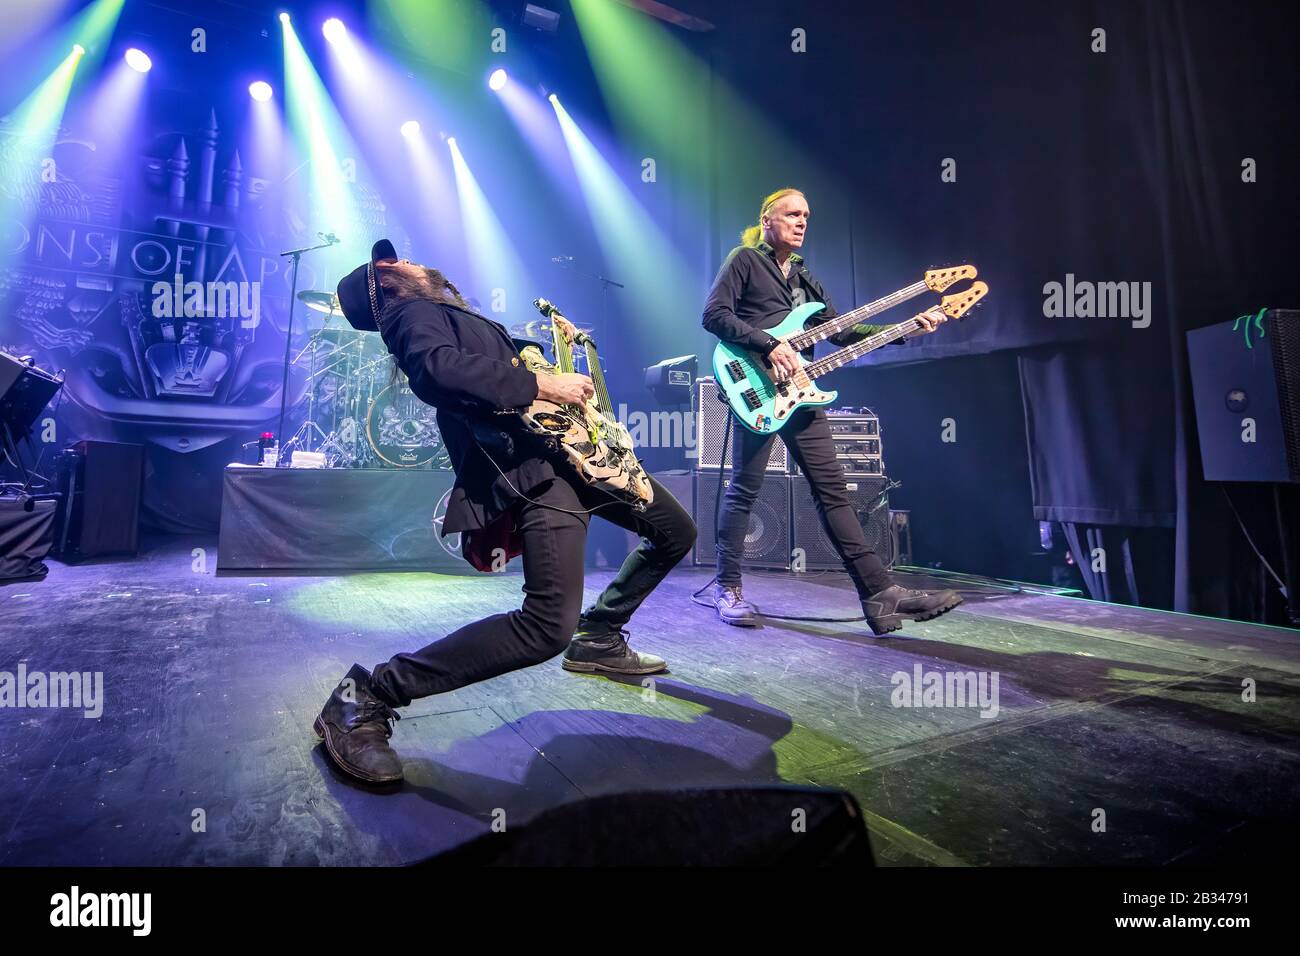 Drammen, Norway. 02nd, March 2020. The Amerian hard rock band Sons of Apollo performs a live concert at Union Scene in Drammen. Here guitarist Ron Thal a.k.a. Bumblefoot (L) is seen live on stage with bass player Billy Sheehan (R). (Photo credit: Gonzales Photo - Terje Dokken). Stock Photo